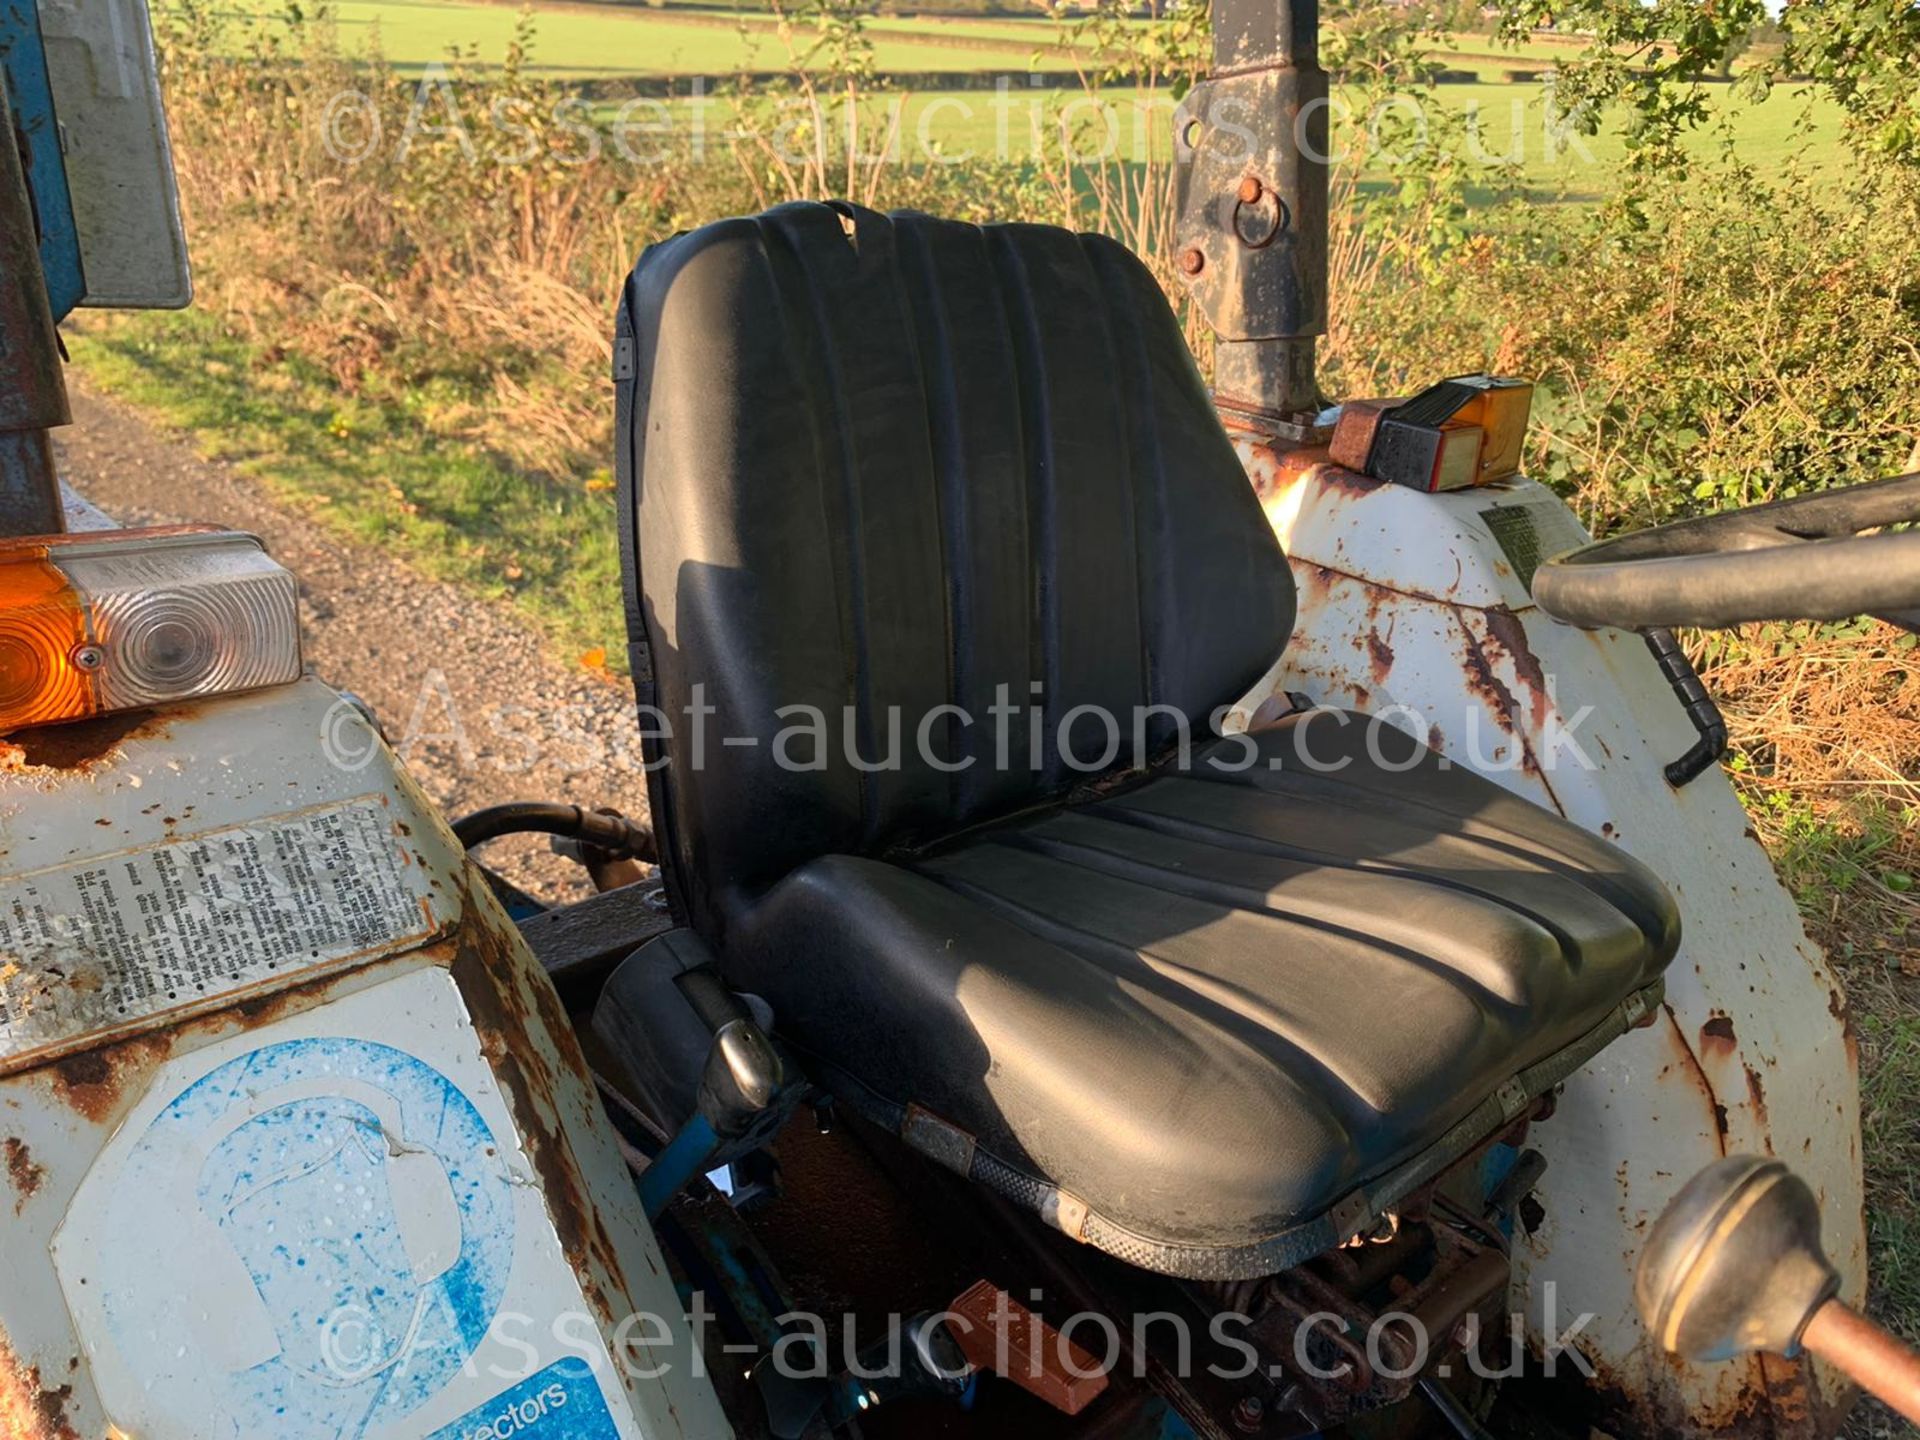 FORD 1720 28hp 4WD COMPACT TRACTOR WITH LEWIS 35Q FRONT LOADER AND BUCKET, RUNS DRIVES LIFTS WELL - Image 11 of 11